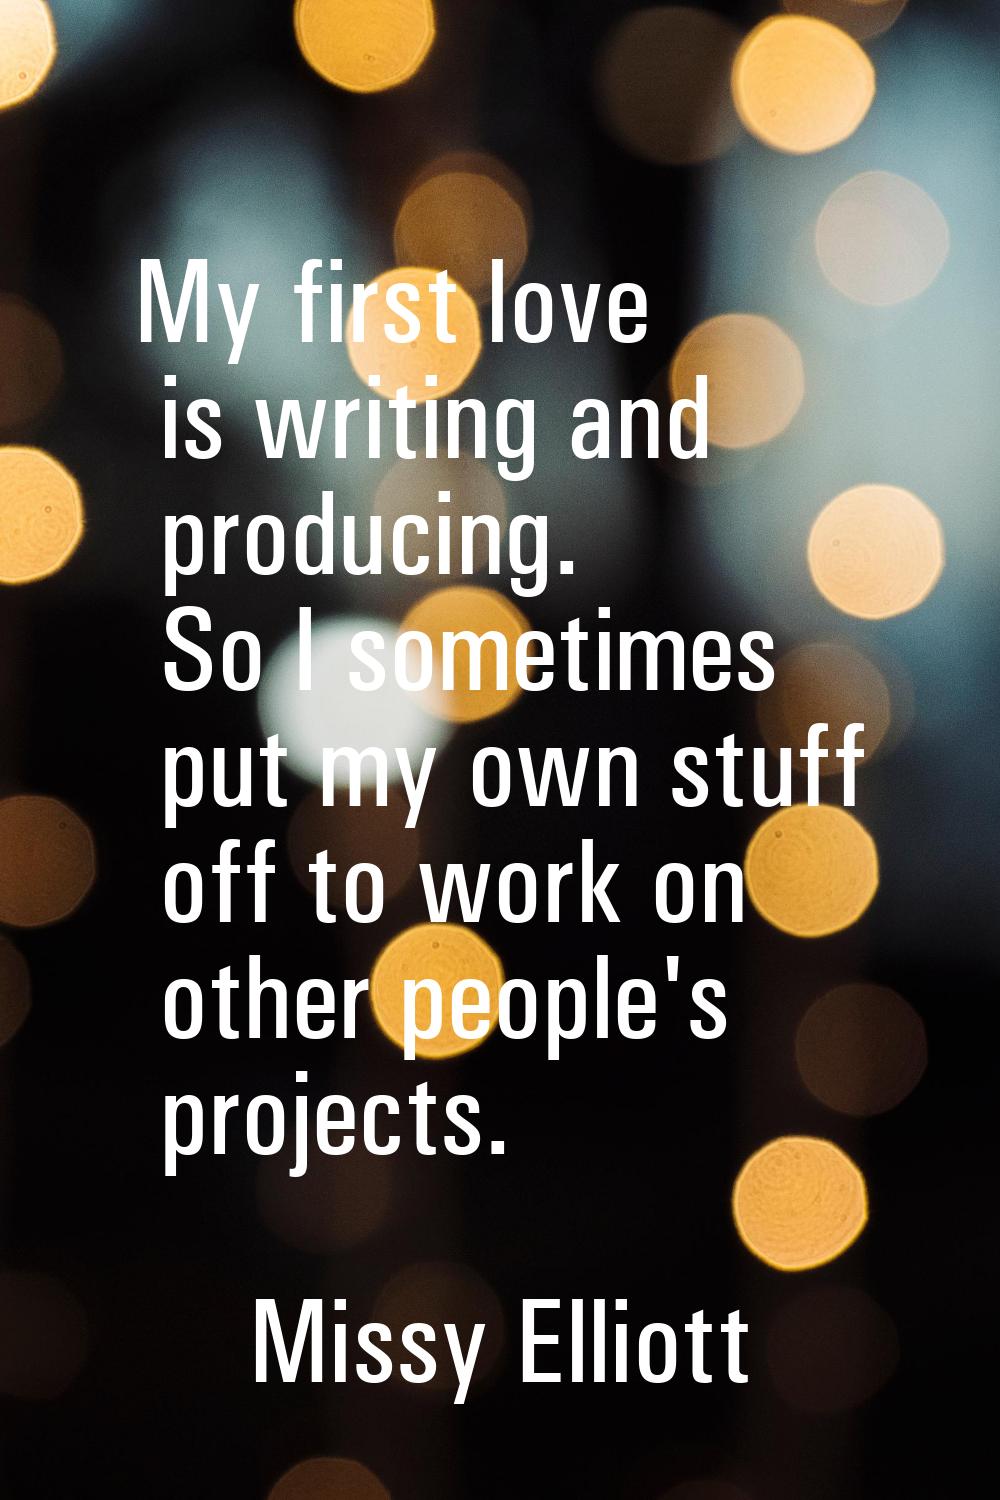 My first love is writing and producing. So I sometimes put my own stuff off to work on other people